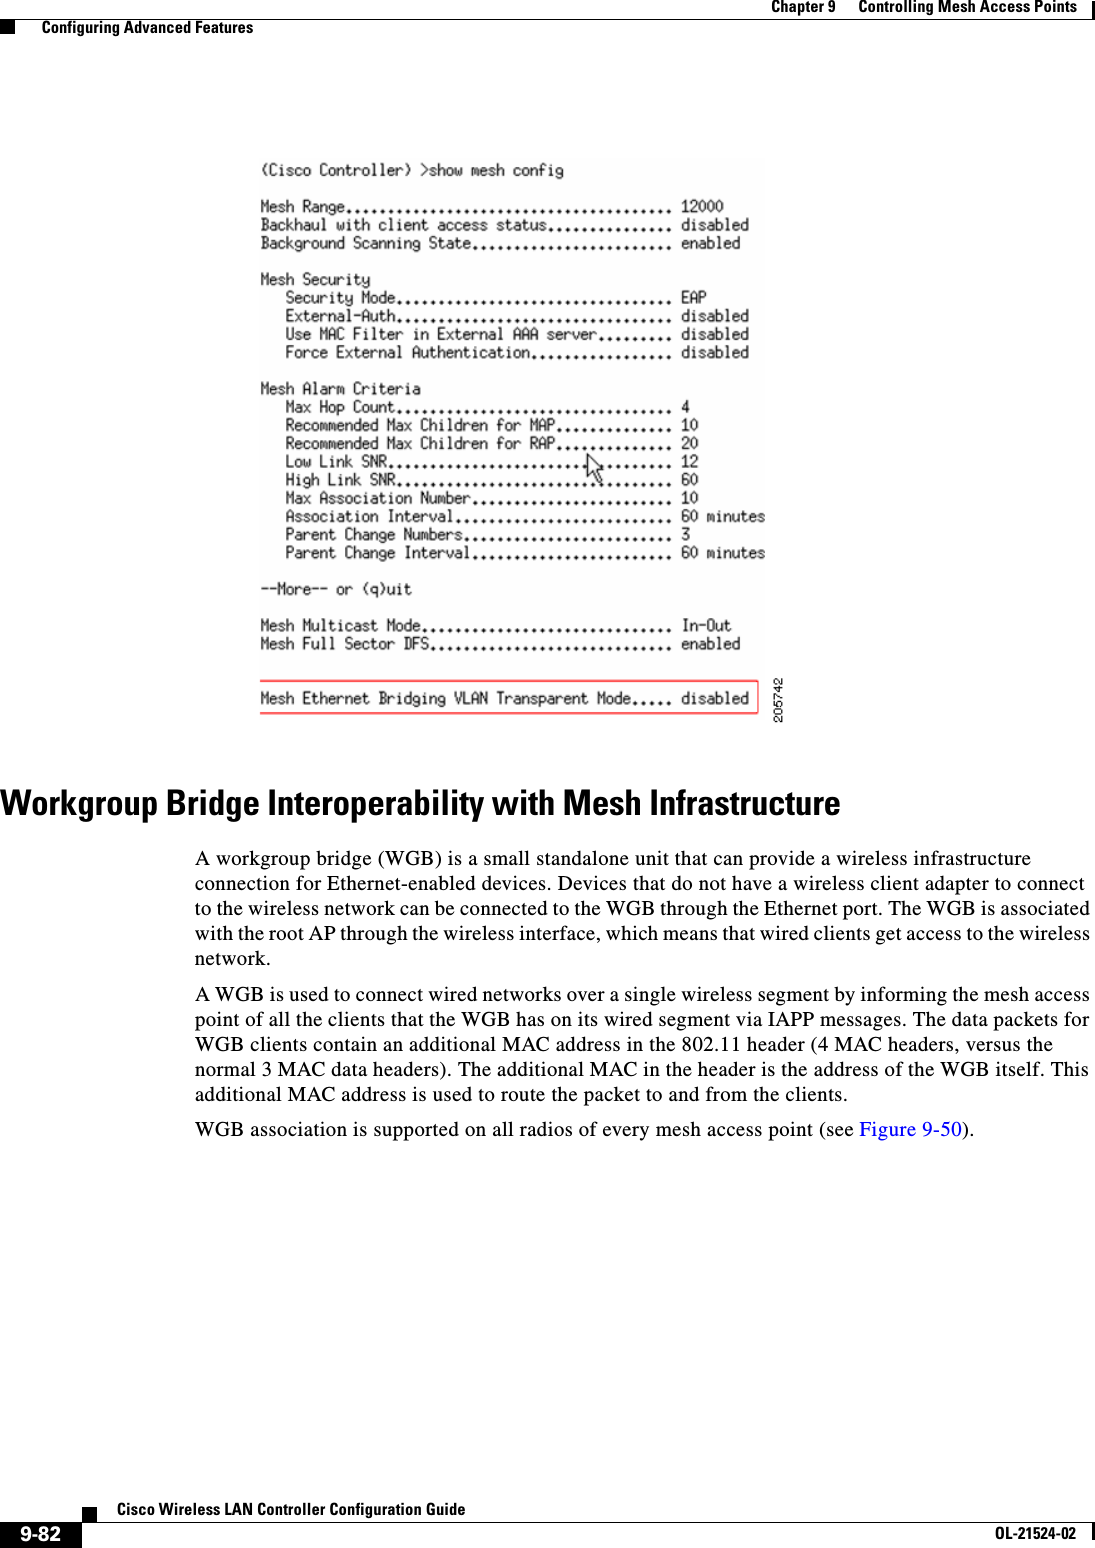  9-82Cisco Wireless LAN Controller Configuration GuideOL-21524-02Chapter 9      Controlling Mesh Access Points  Configuring Advanced FeaturesWorkgroup Bridge Interoperability with Mesh InfrastructureA workgroup bridge (WGB) is a small standalone unit that can provide a wireless infrastructure connection for Ethernet-enabled devices. Devices that do not have a wireless client adapter to connect to the wireless network can be connected to the WGB through the Ethernet port. The WGB is associated with the root AP through the wireless interface, which means that wired clients get access to the wireless network.A WGB is used to connect wired networks over a single wireless segment by informing the mesh access point of all the clients that the WGB has on its wired segment via IAPP messages. The data packets for WGB clients contain an additional MAC address in the 802.11 header (4 MAC headers, versus the normal 3 MAC data headers). The additional MAC in the header is the address of the WGB itself. This additional MAC address is used to route the packet to and from the clients.WGB association is supported on all radios of every mesh access point (see Figure 9-50).